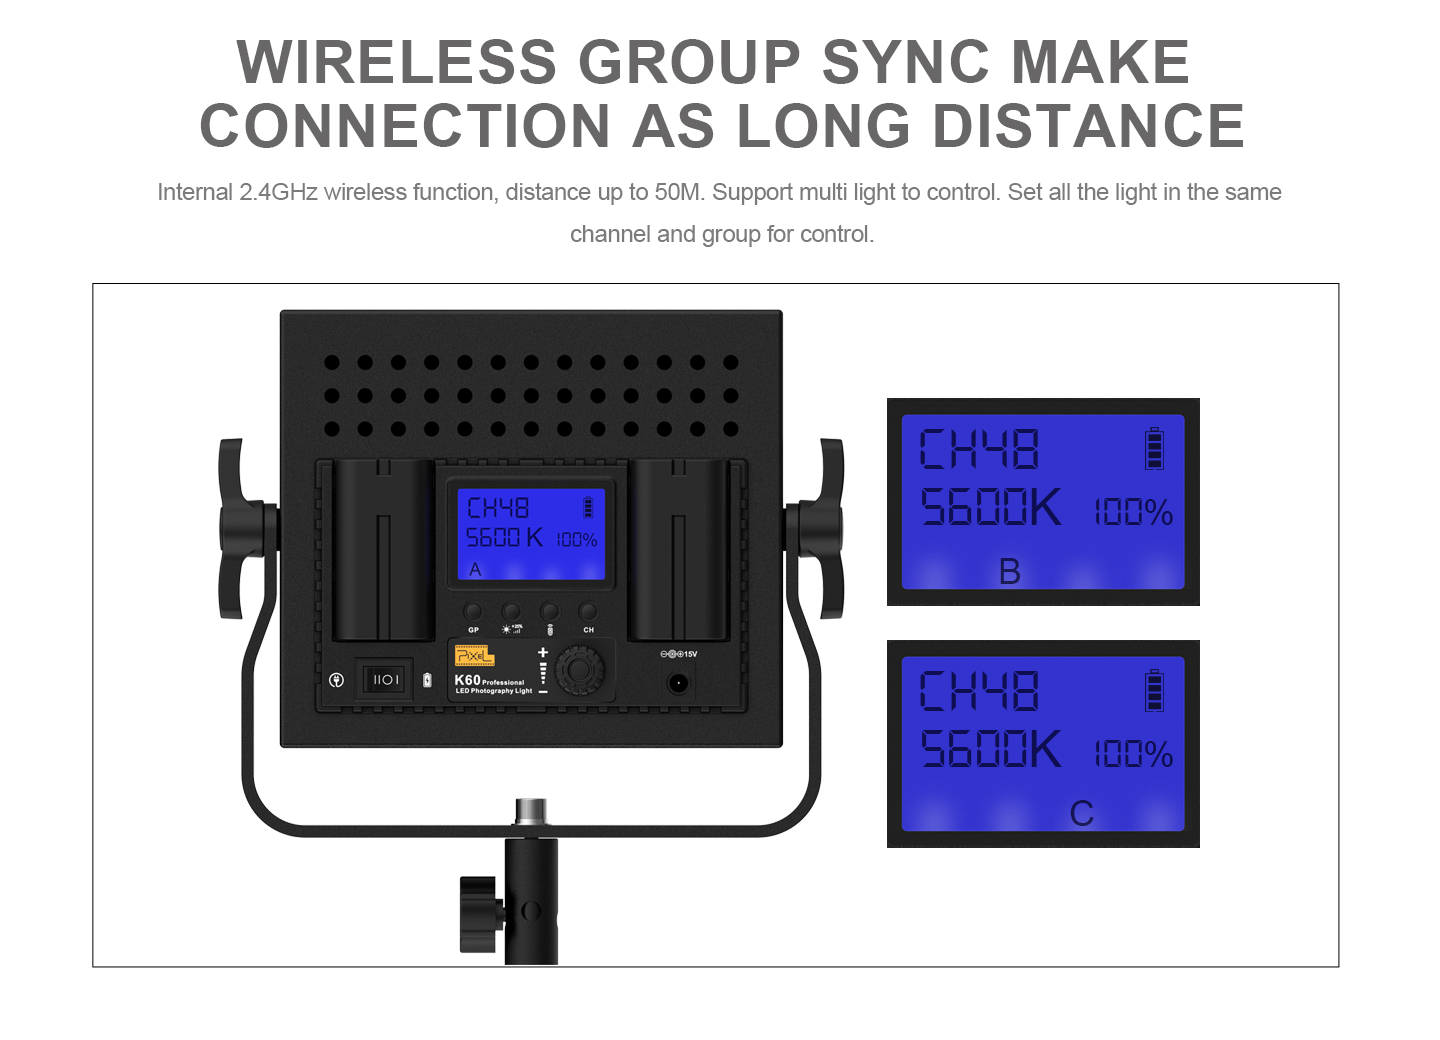 WIRELESS GROUP SYNC MAKE CONNECTION AS LONG DISTANCE